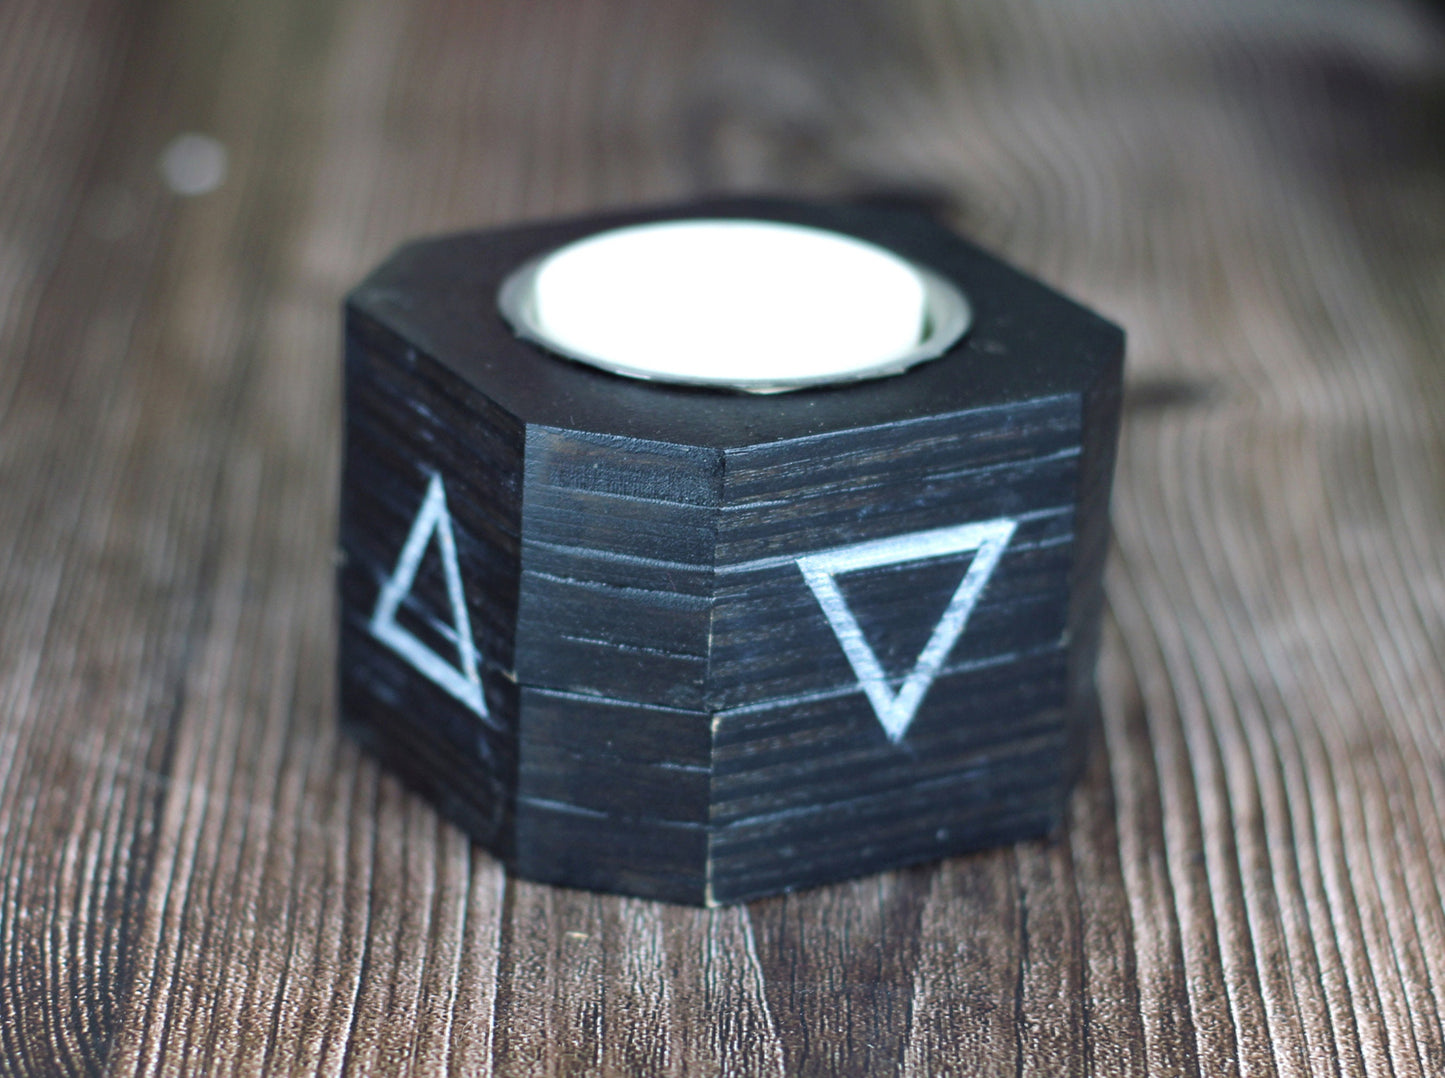 Secret compartment wooden candle holder with engraved Wicca elemental symbols, stash your valuables safely in the hidden tin